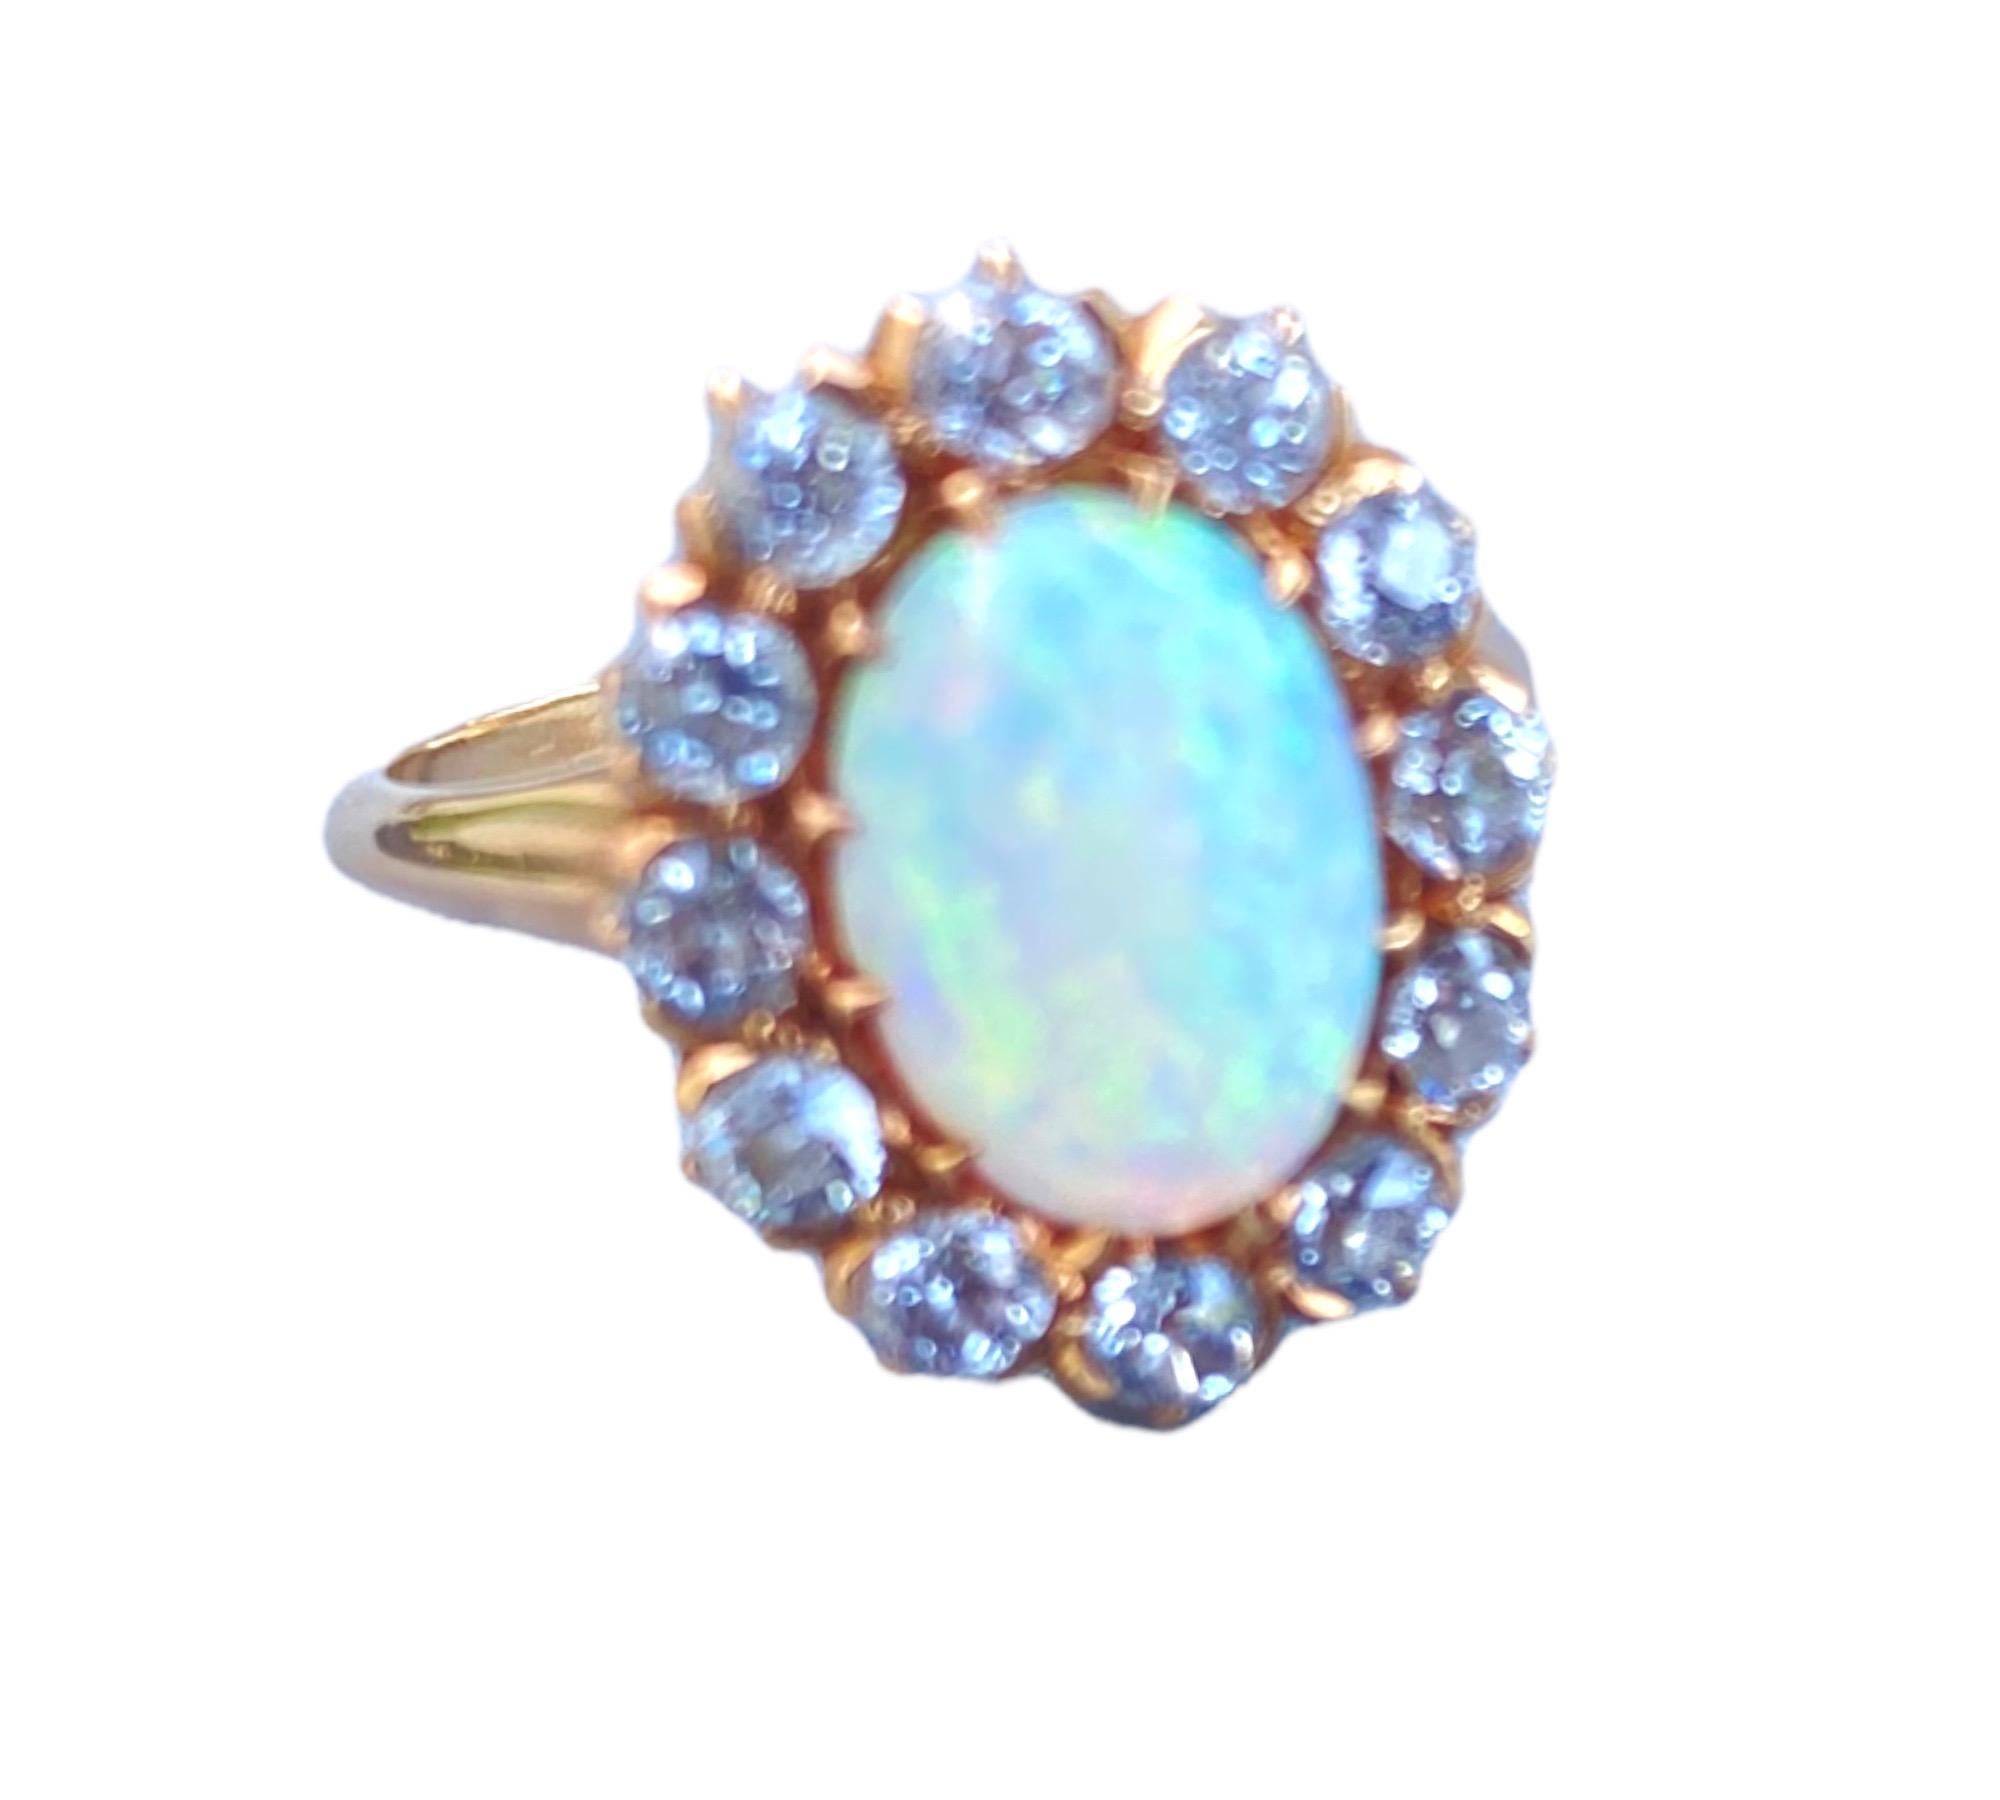 12 European Cut diamonds surround a fiery oval-shaped opal. The ring measures 13  x 16 mm in diameter and is made of 14 karat gold. The metal is yellow with a pinkish tint of color. Great contrast to showcase this gorgeous Opal. 
The European cut